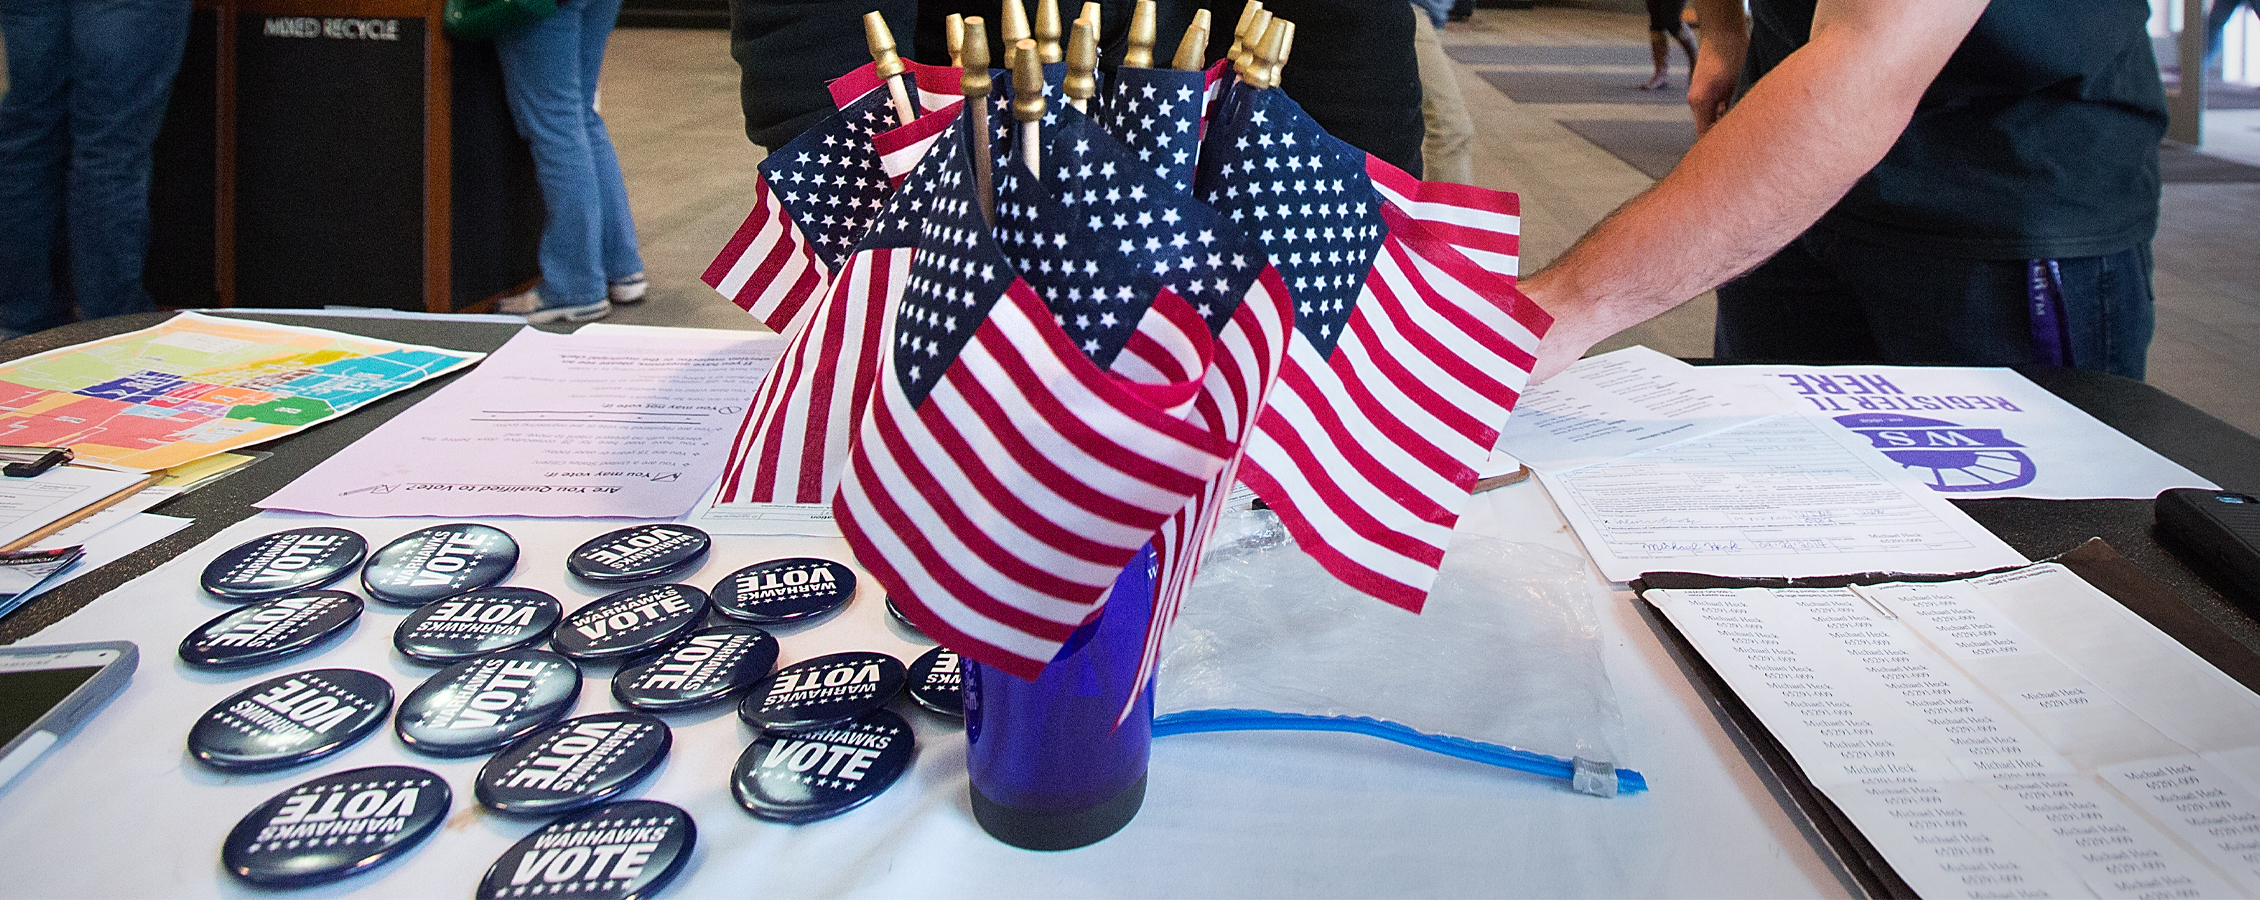 American flags and Warhawks Vote buttons sit on a table.